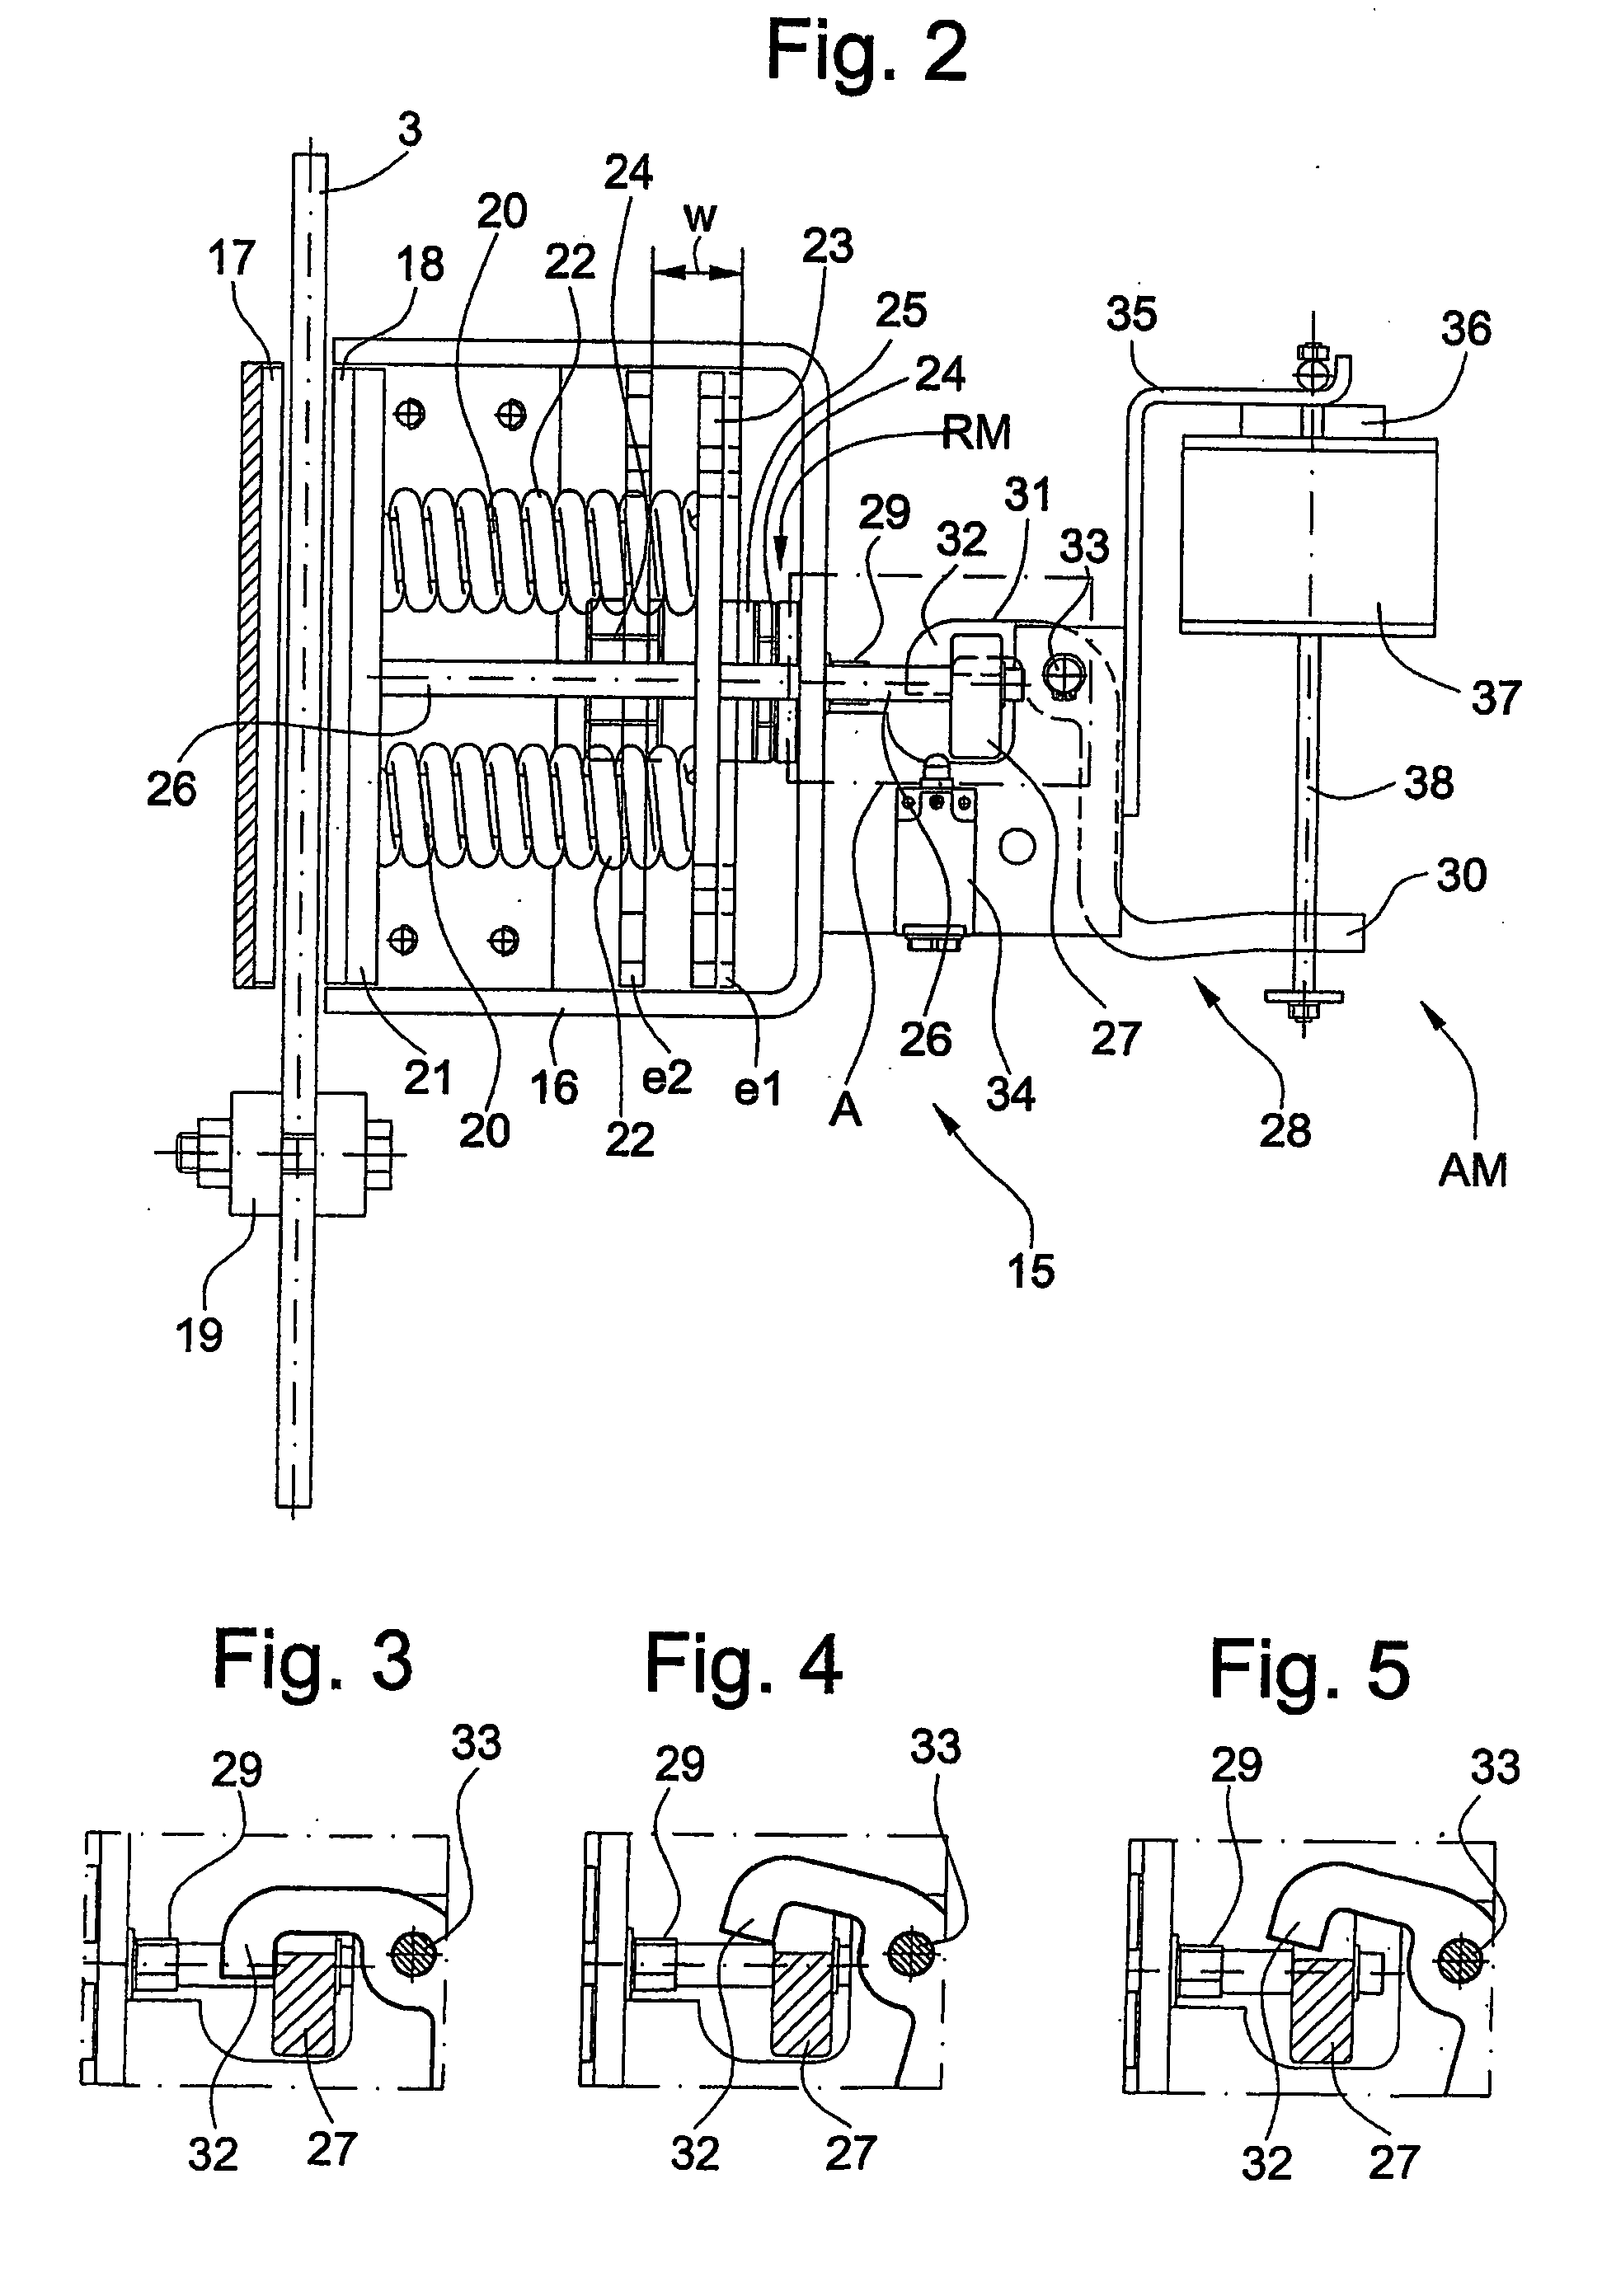 Cable brake for an elevator